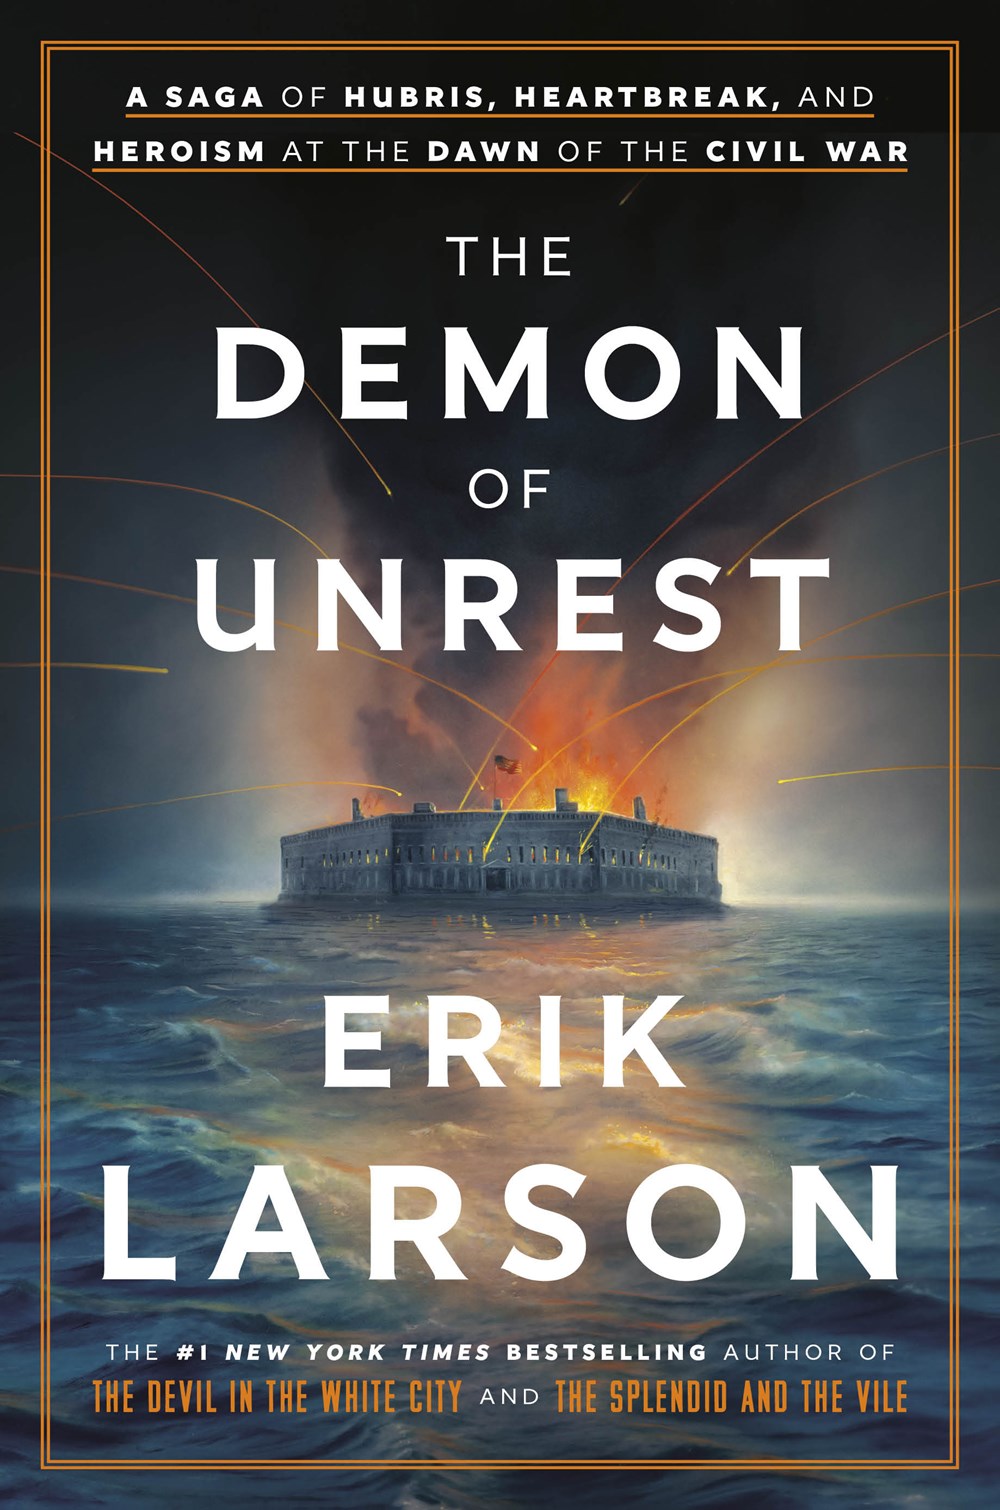 The Demon of Unrest: A Saga of Hubris, Heartbreak, and Heroism at the Dawn of the Civil War by Erik Larson (4/30/24)